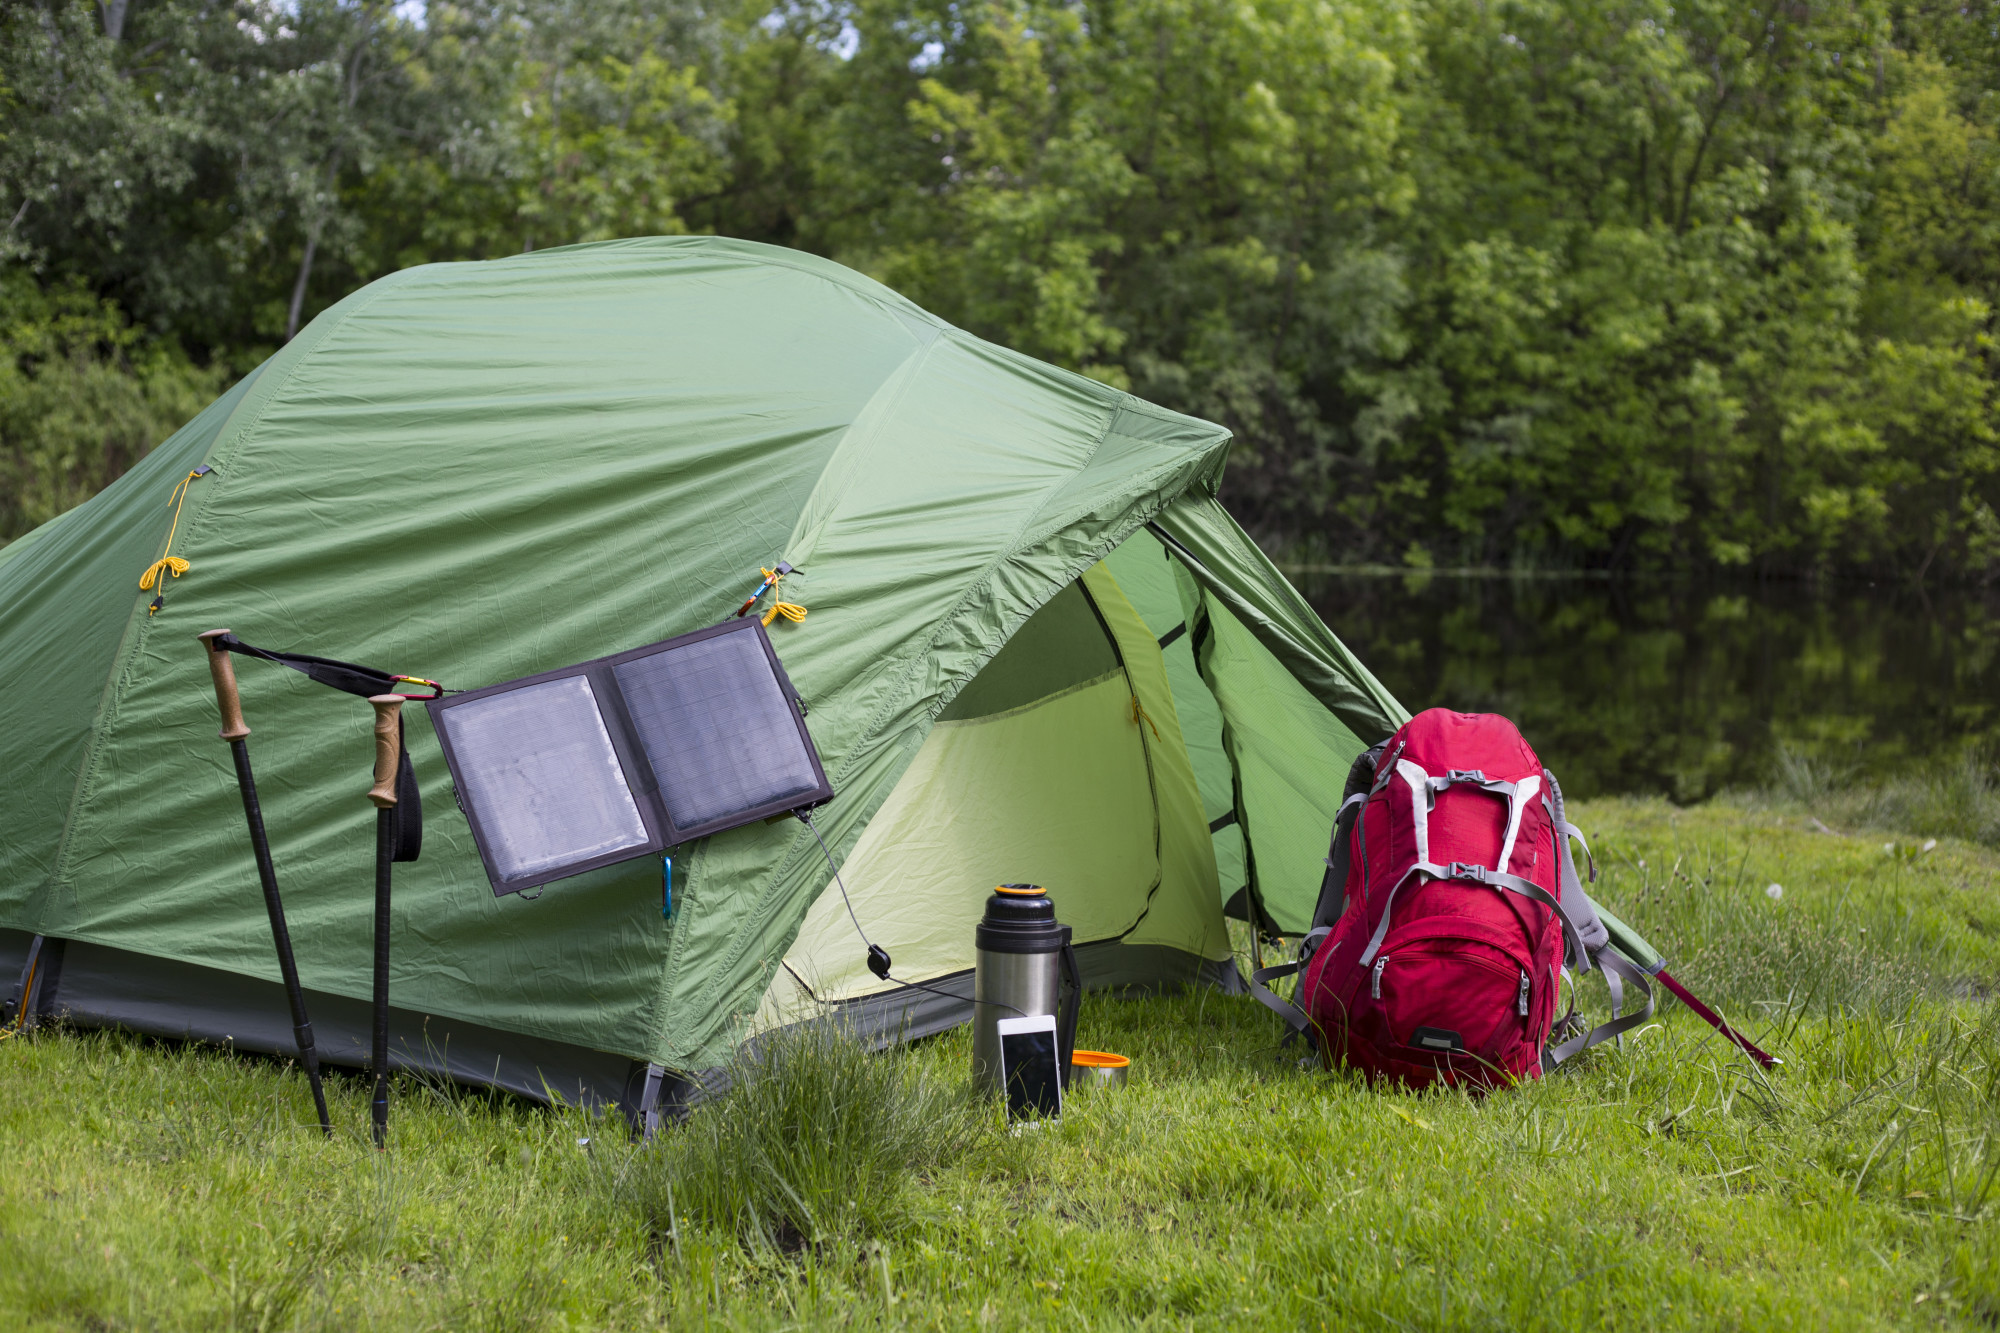 5 Essentials You Need for Your Next Camping Trip